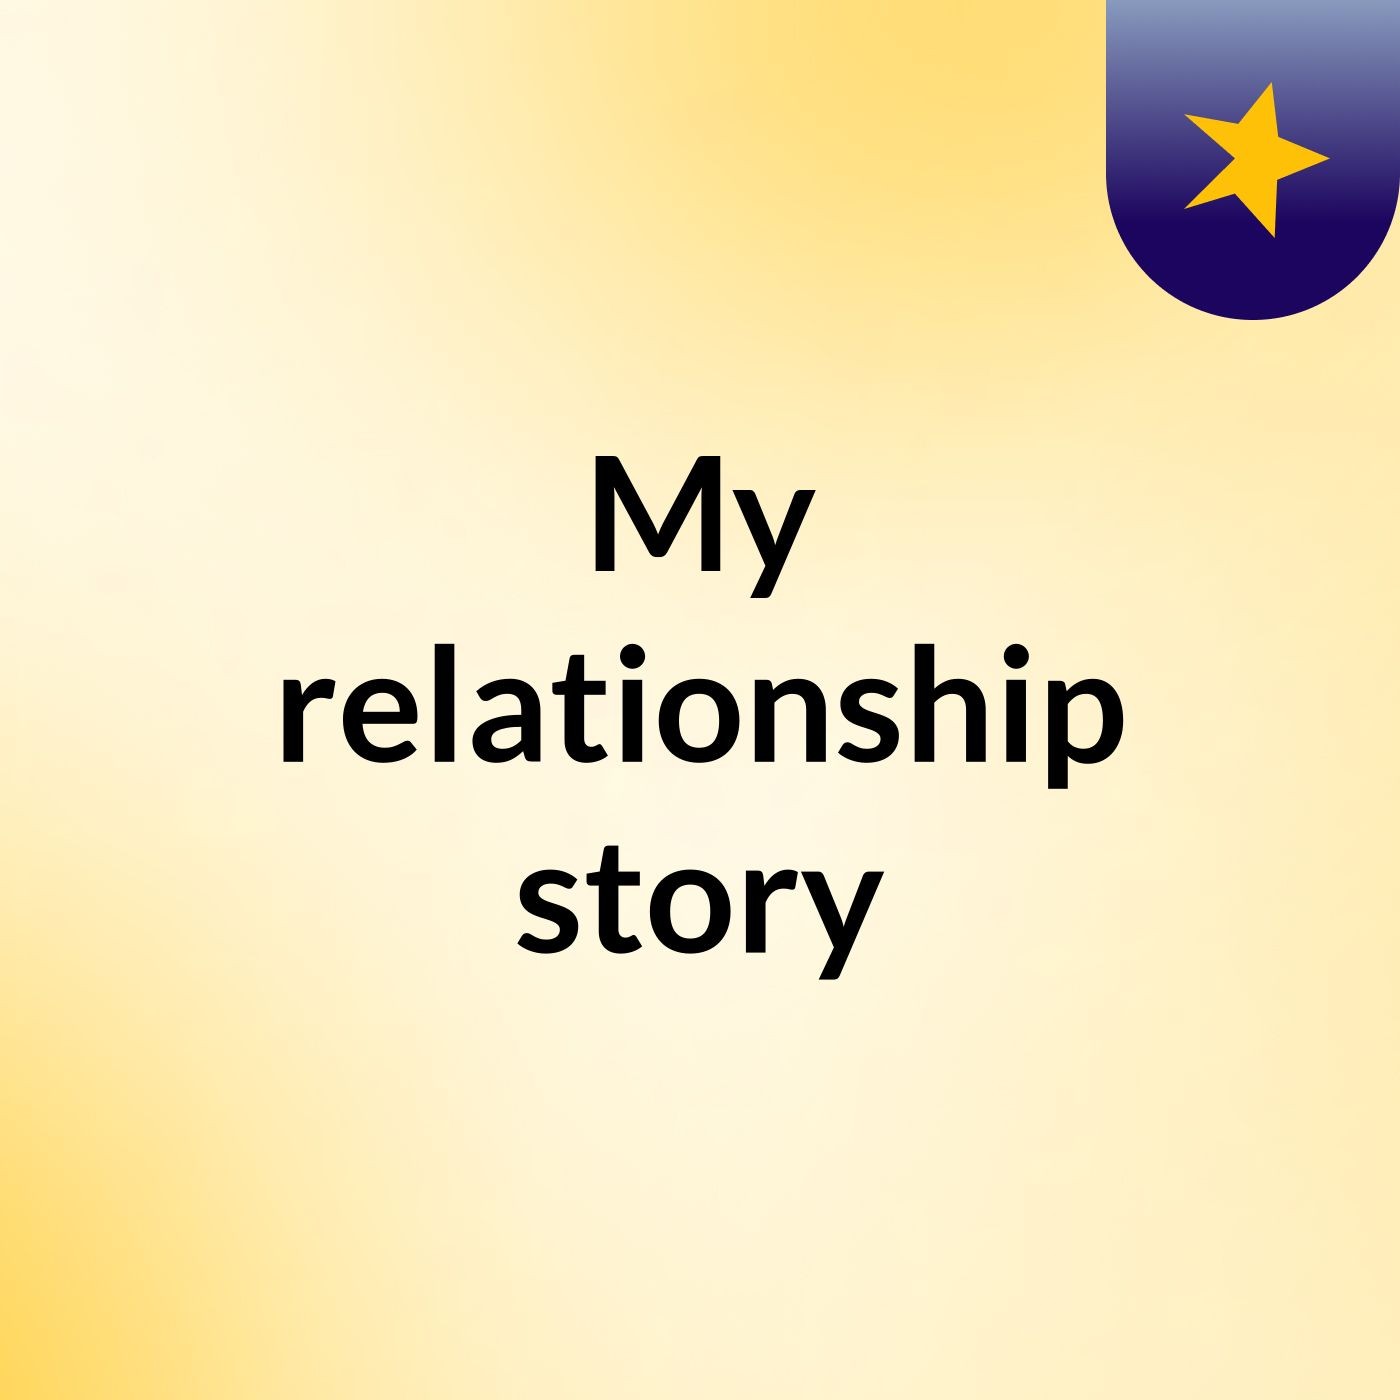 My relationship story